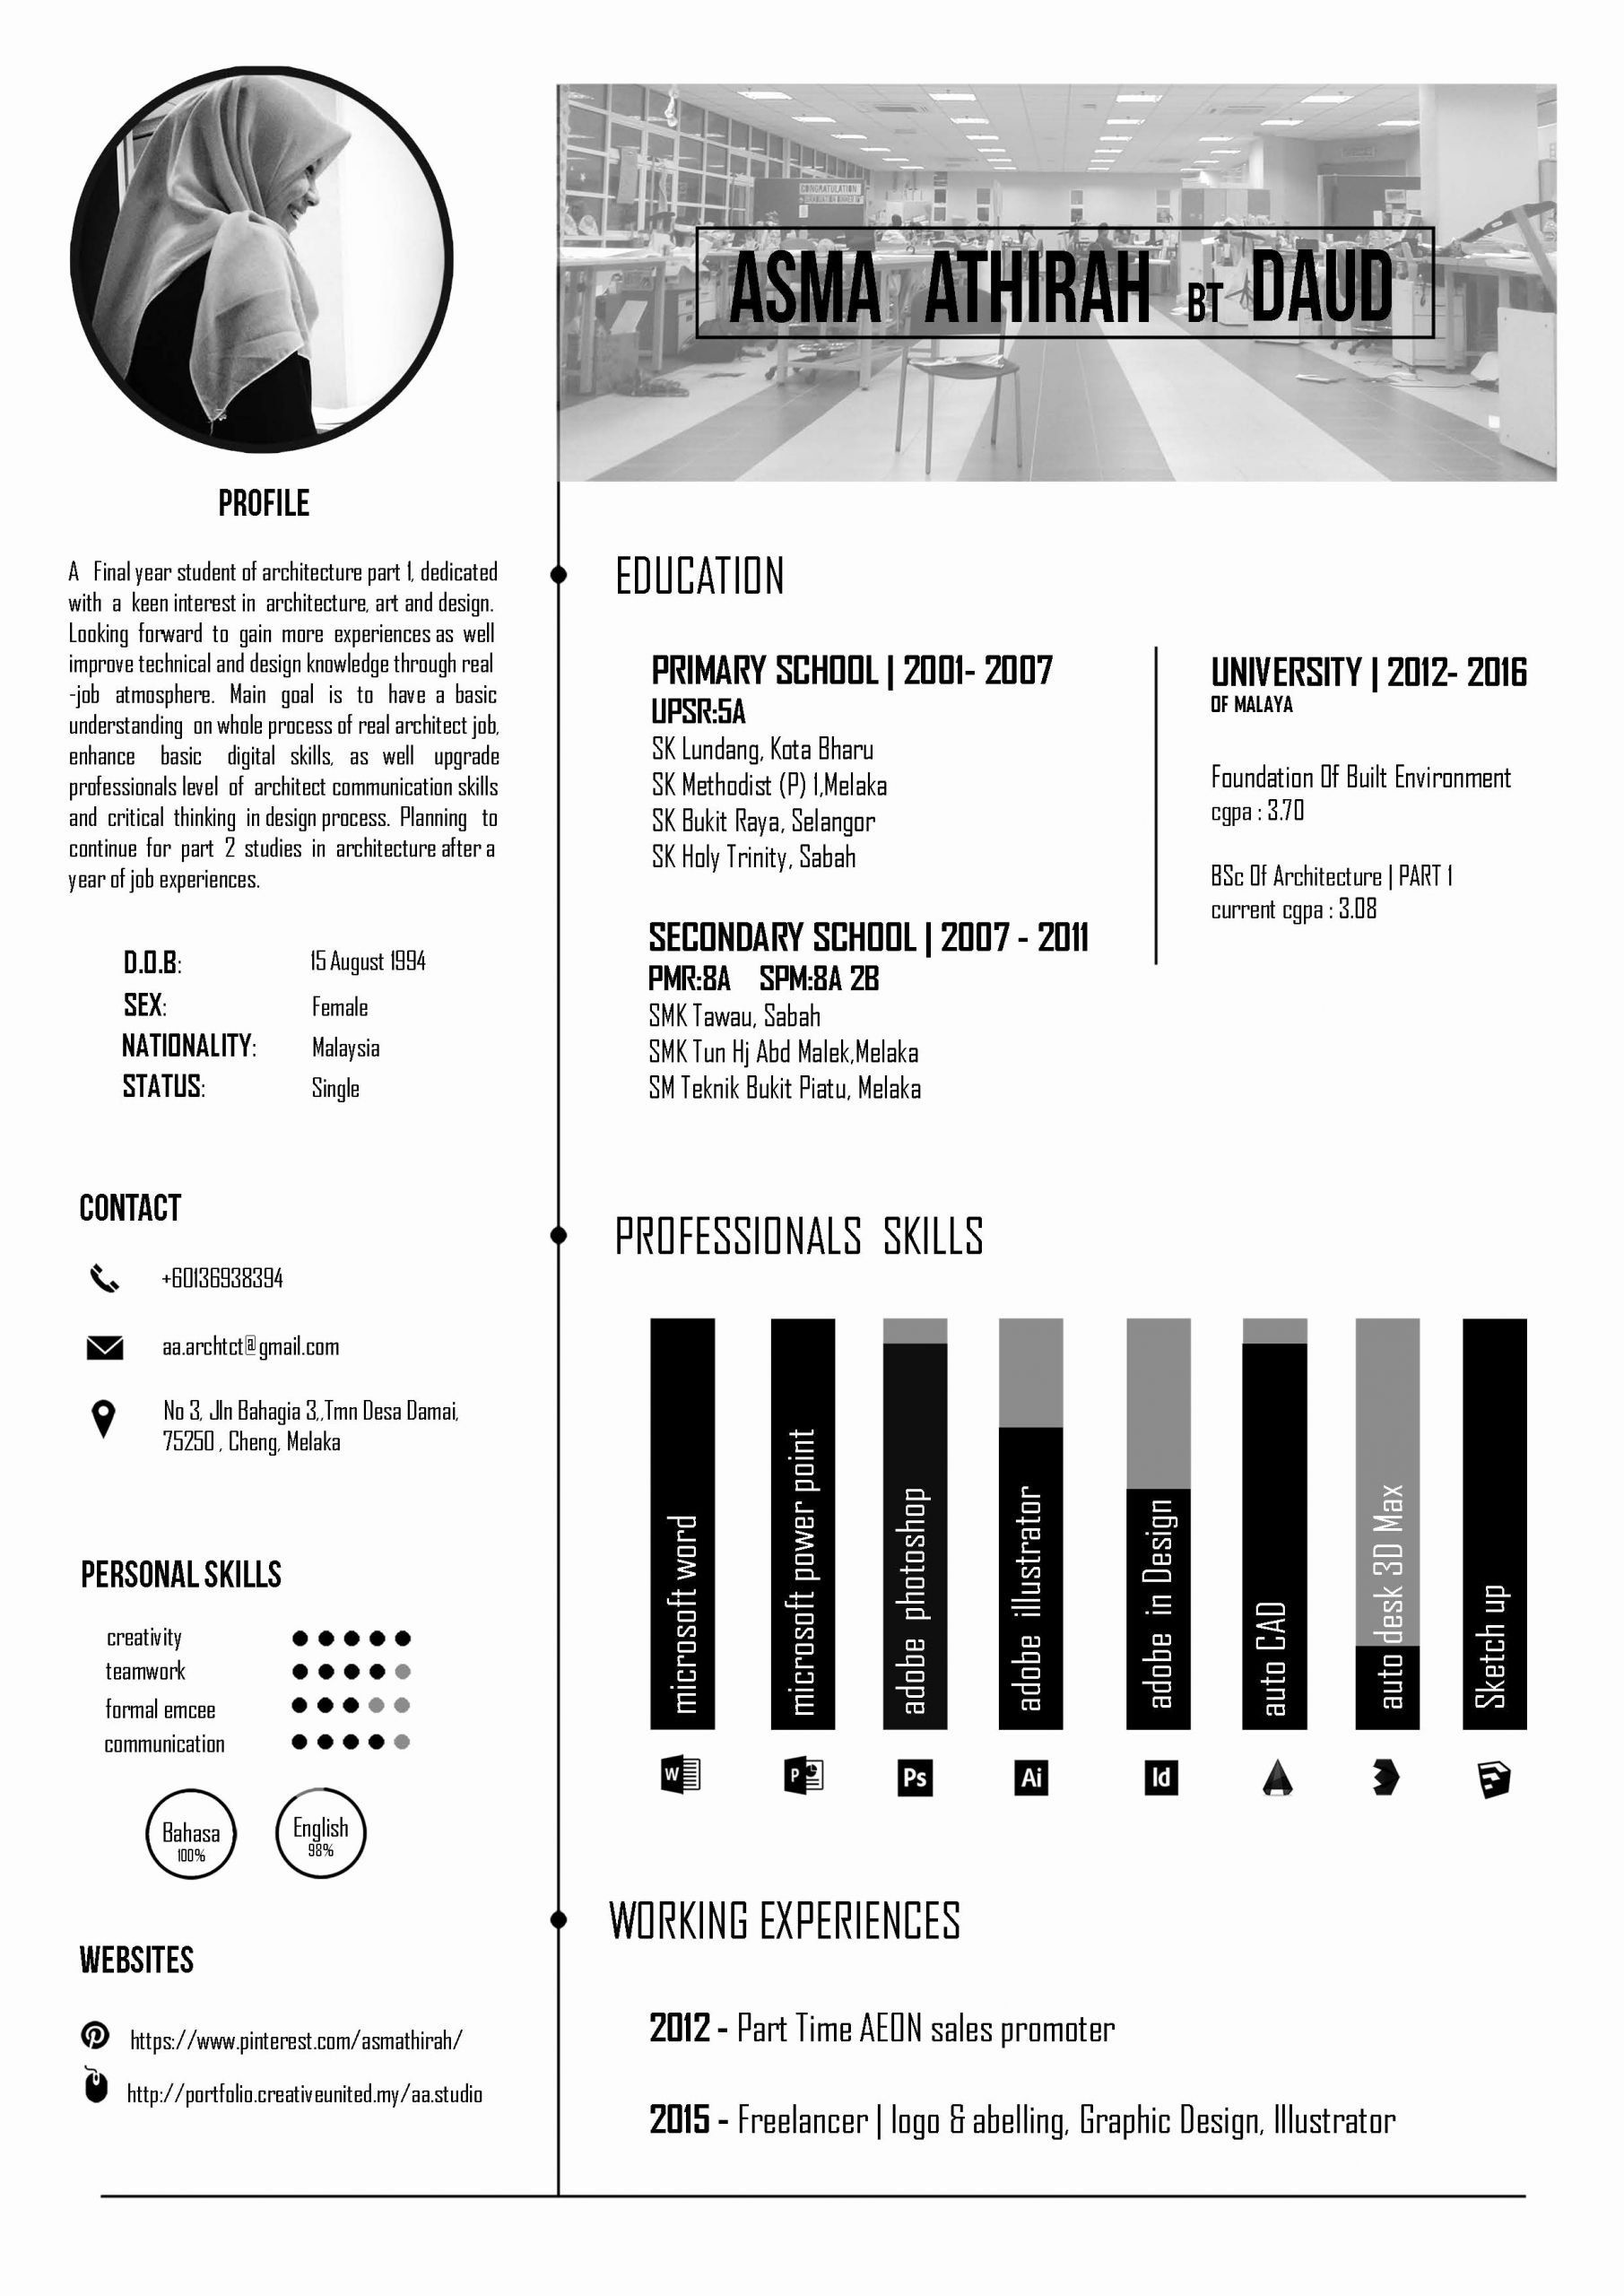 Graphic Design Student Resume Awesome Architecture Resume Black And White Theme Cv Architecture Resume Graphic Design Resume Resume Design Creative